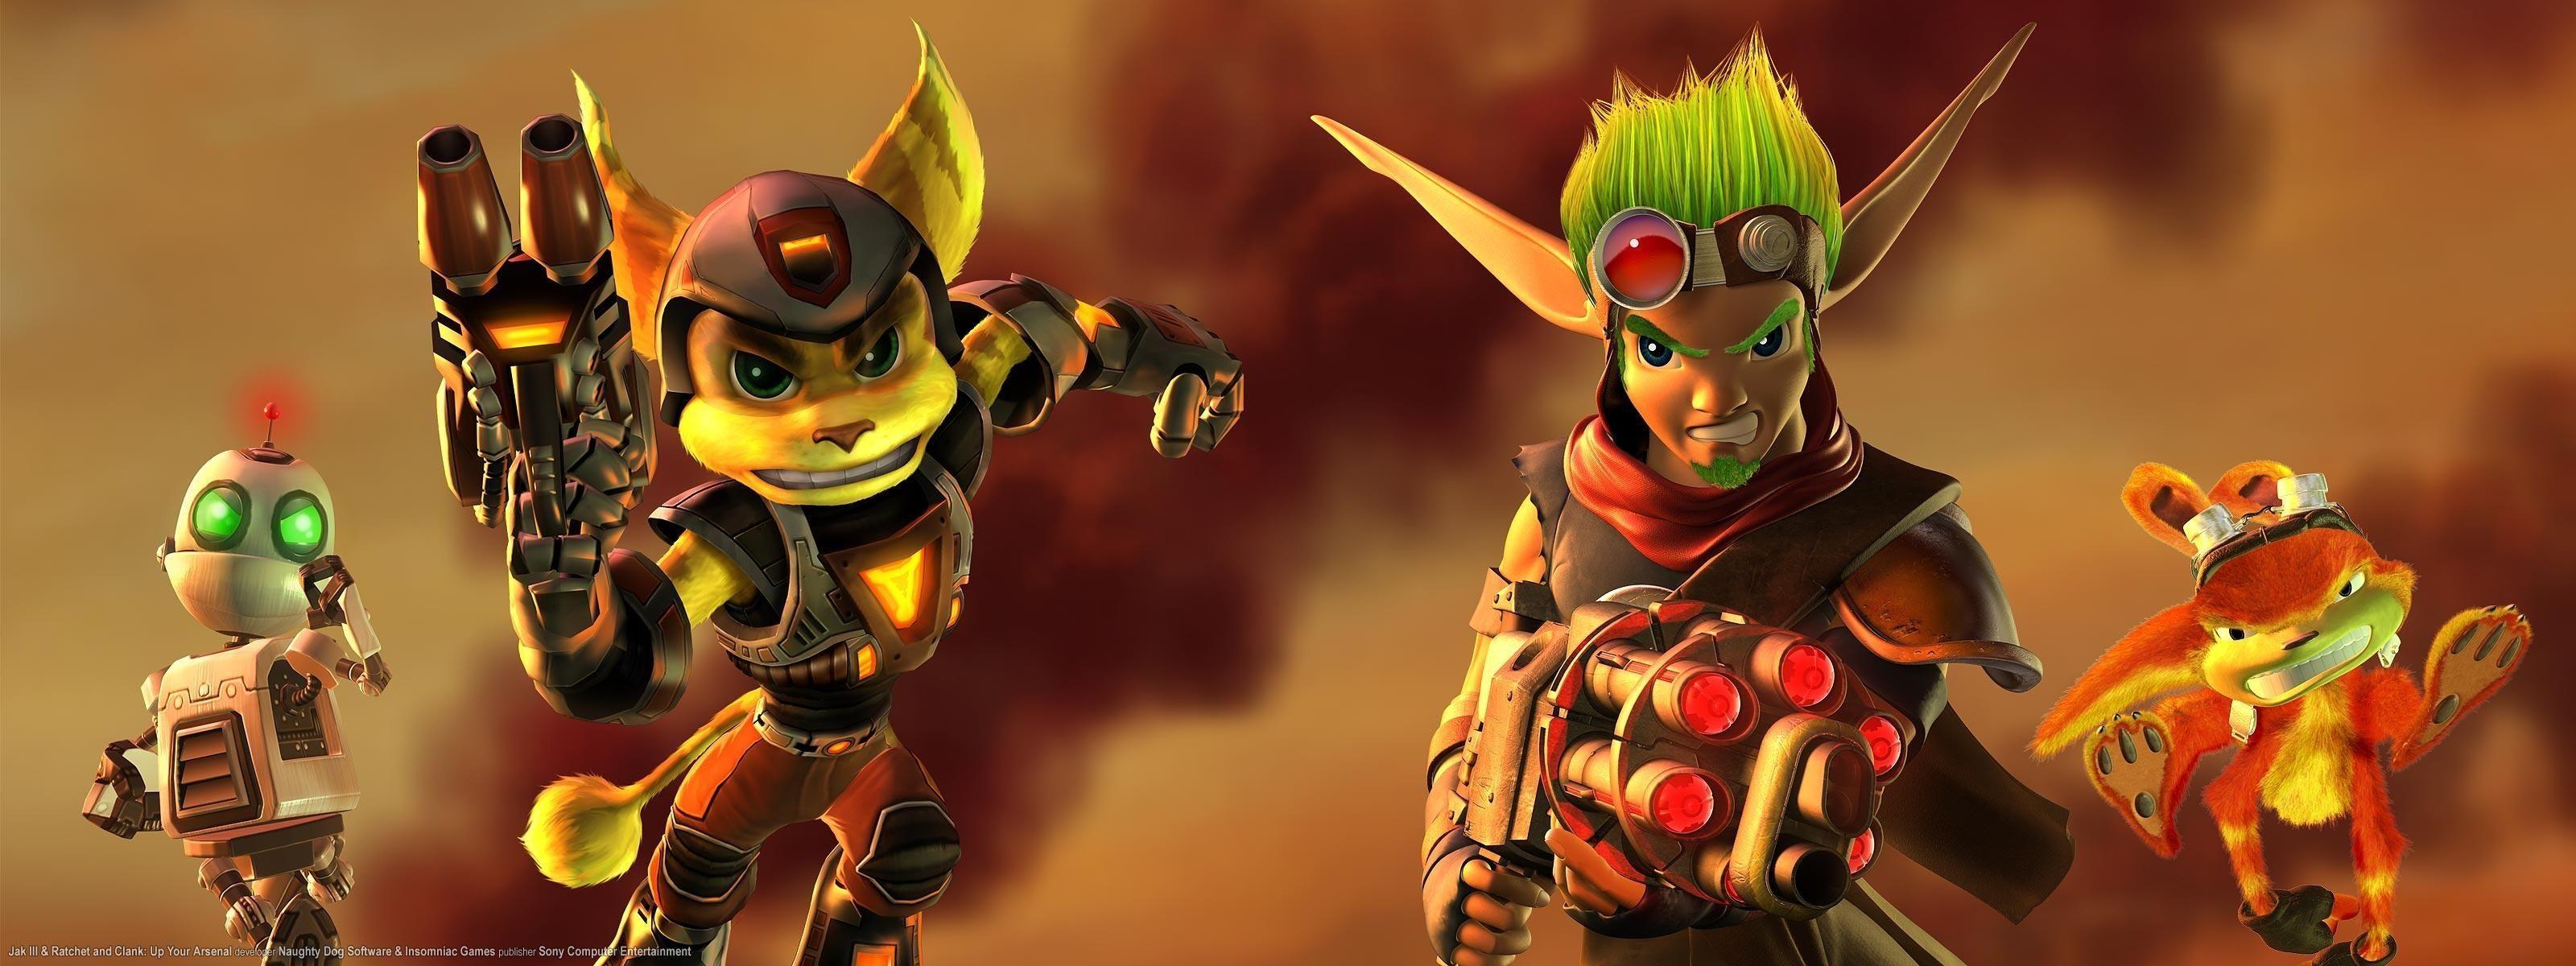 Ratchet and clank insomnia naughty dog jak daxter wallpaper